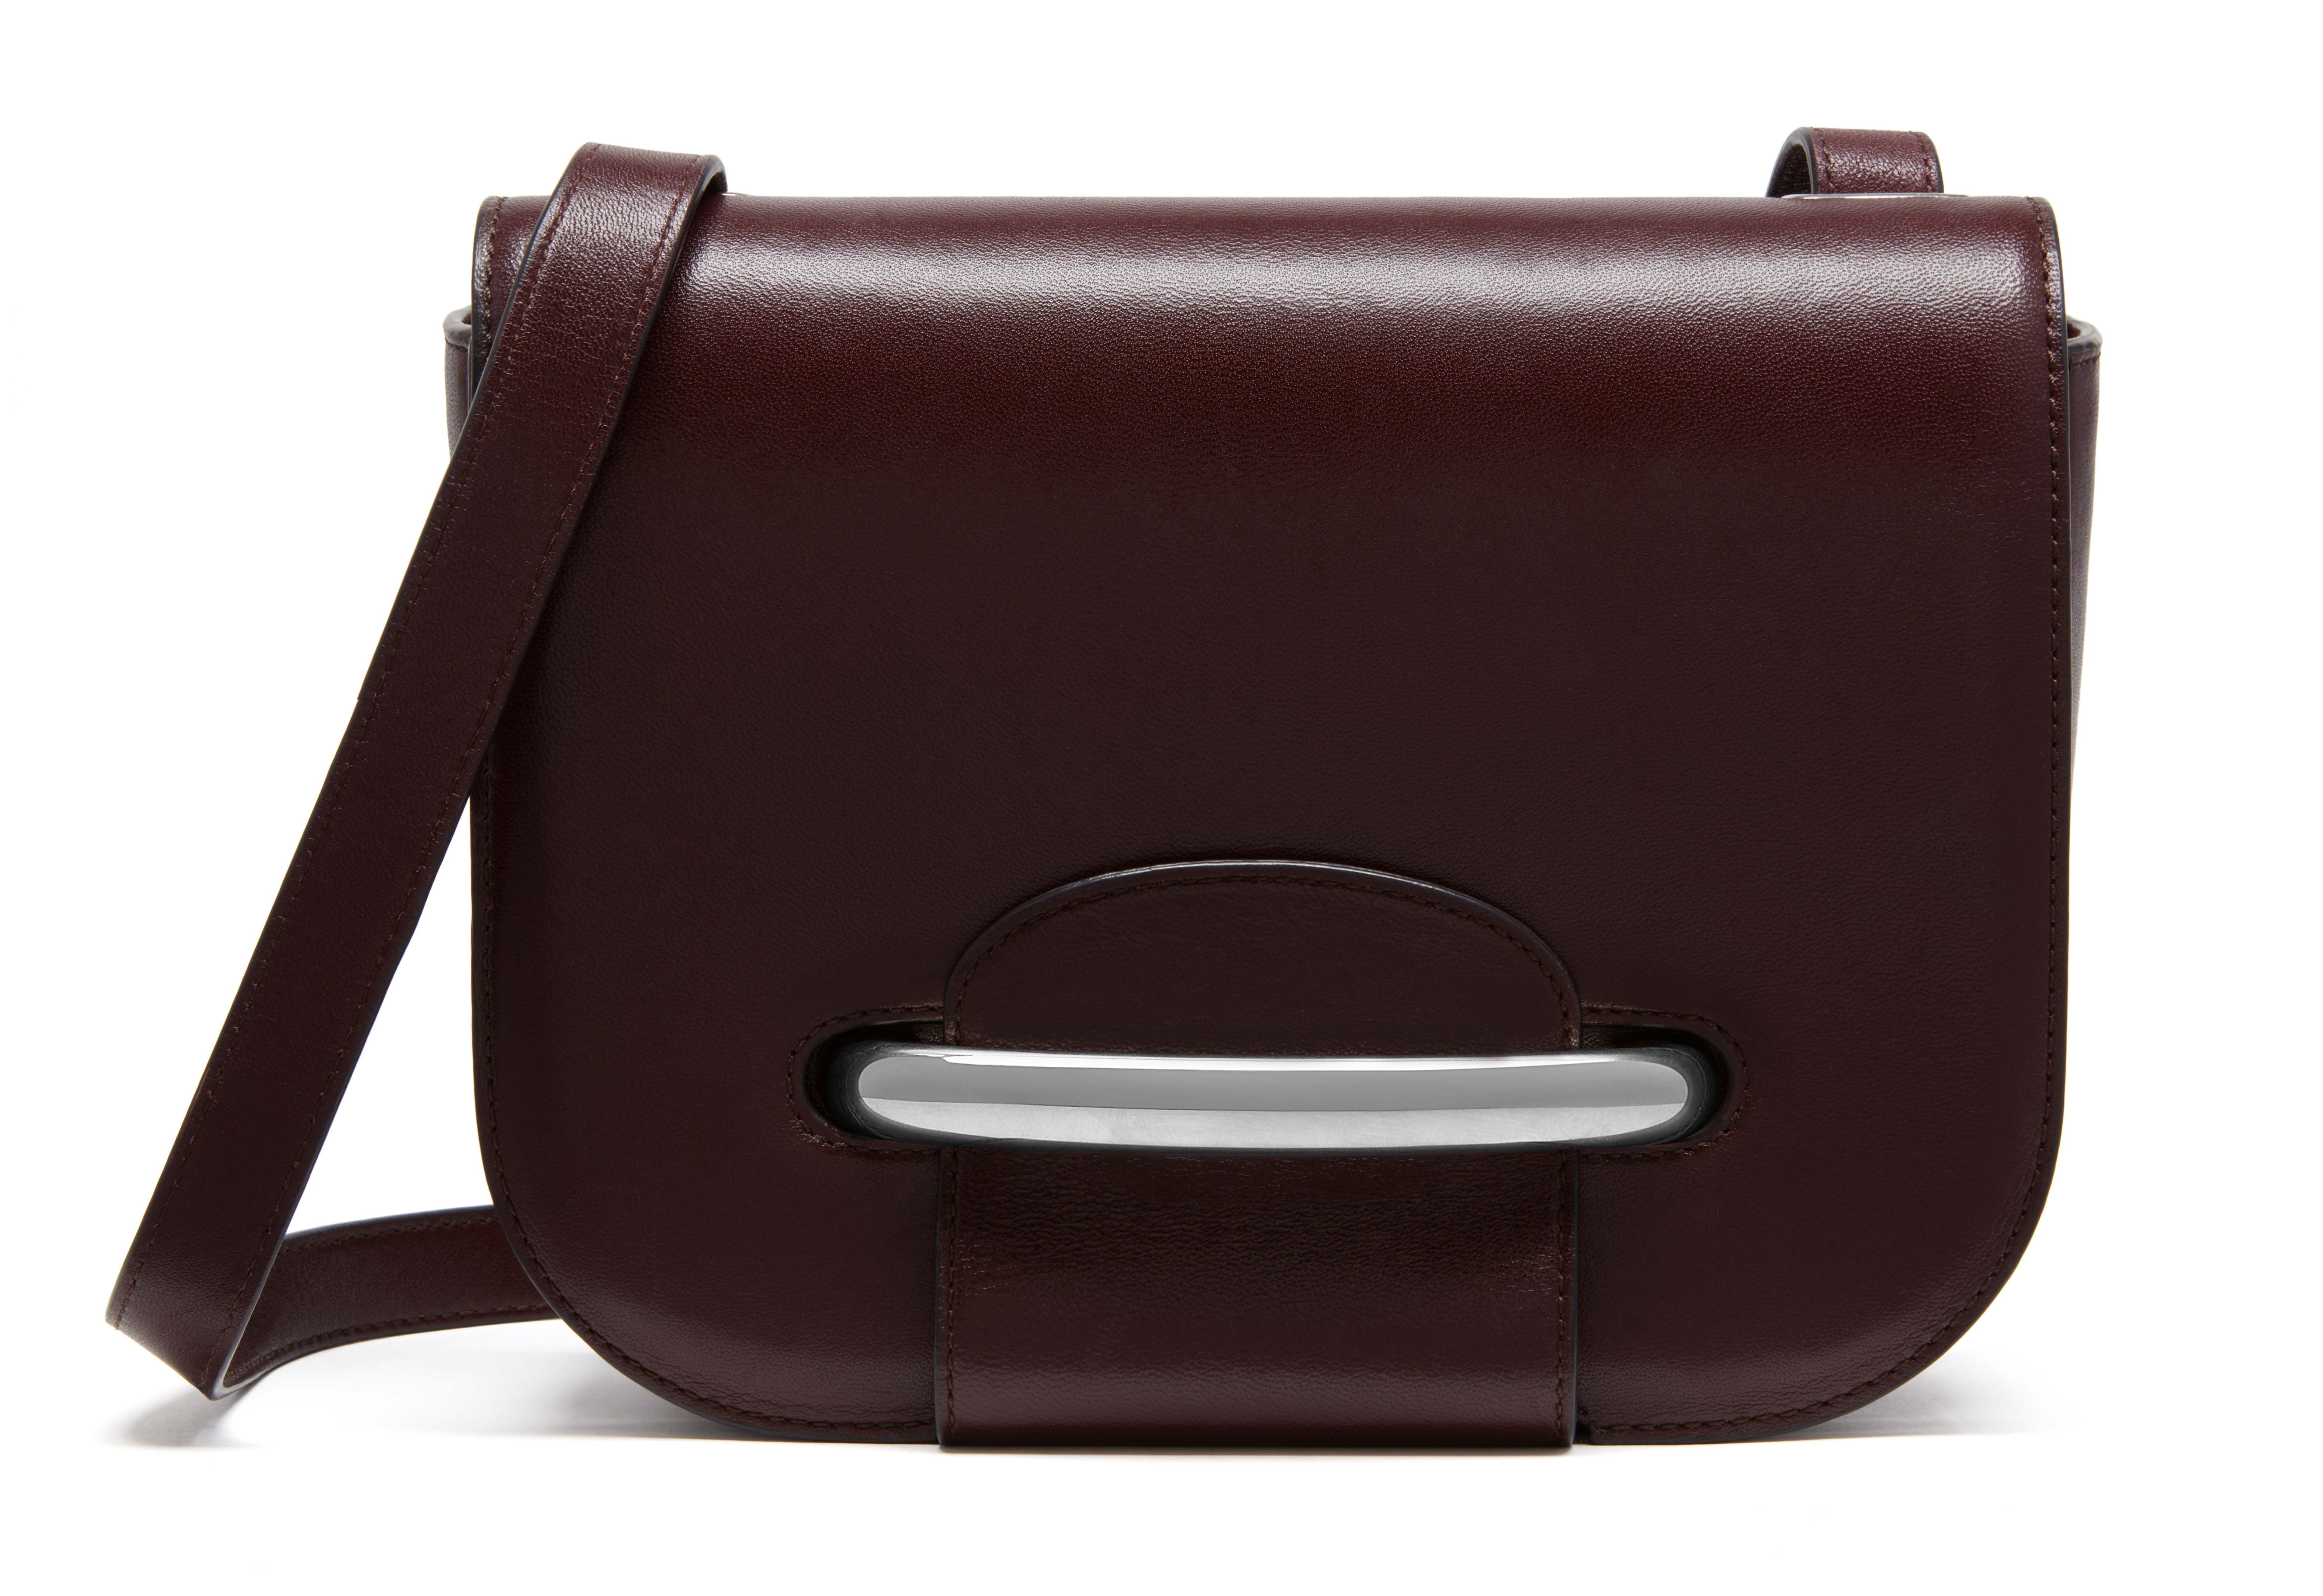 2016 F/W 2016 Mulberry Small New Bayswater Oxblood Natural Grain Leather  [New Bayswater 01] - £158.00 : Mulberry Outlet UK,… | Mulberry bag, Mulberry  handbags, Bags